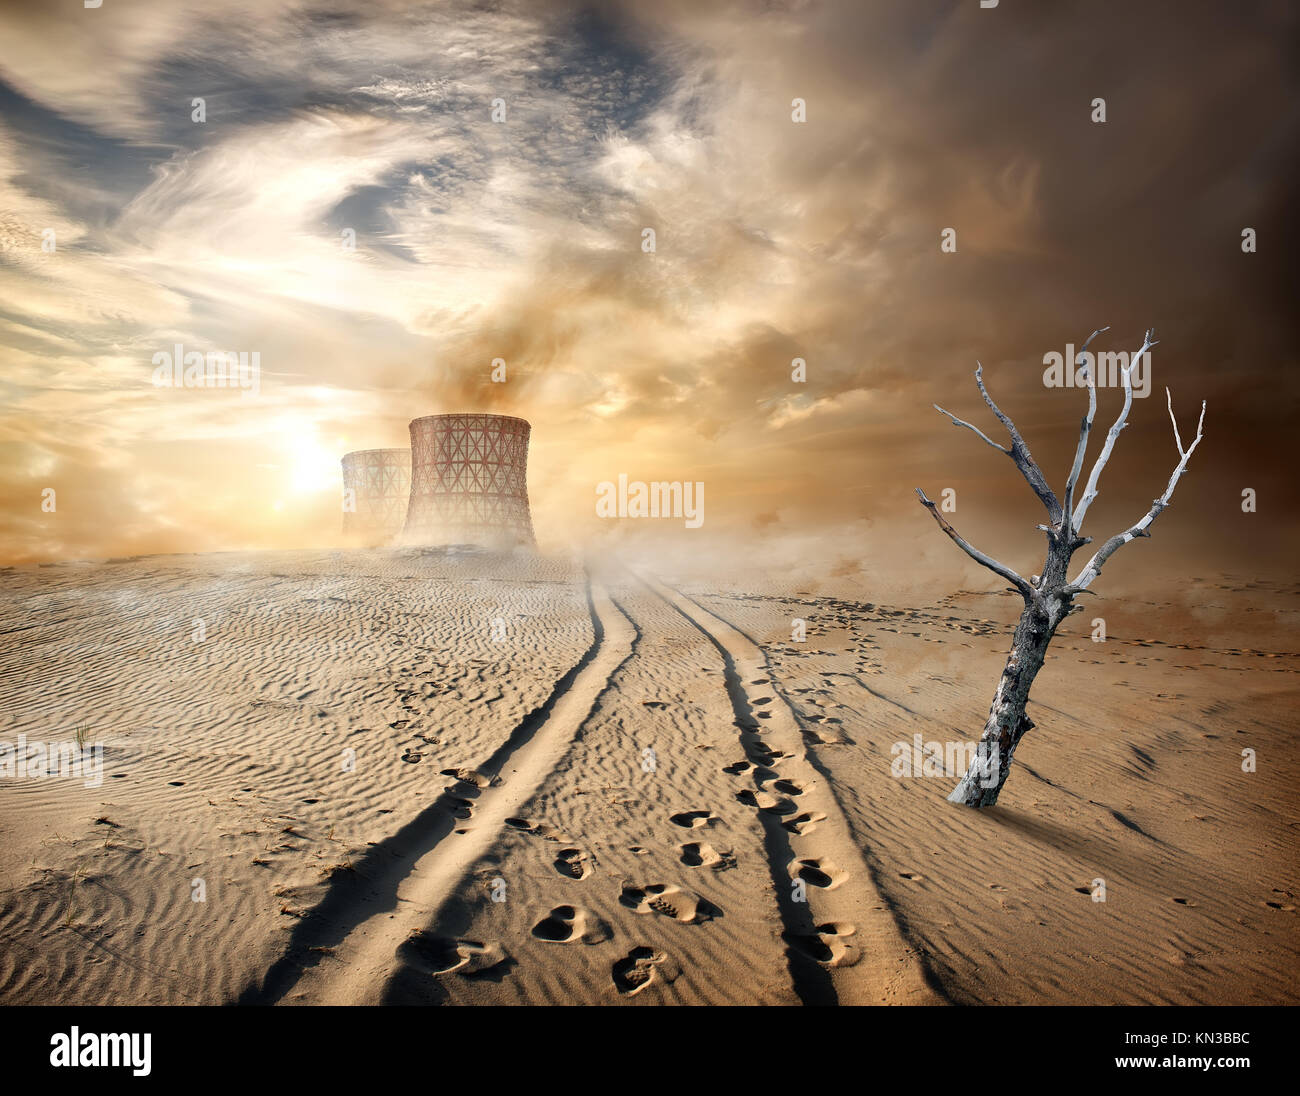 Industrial pipes and dry tree in desert. Stock Photo